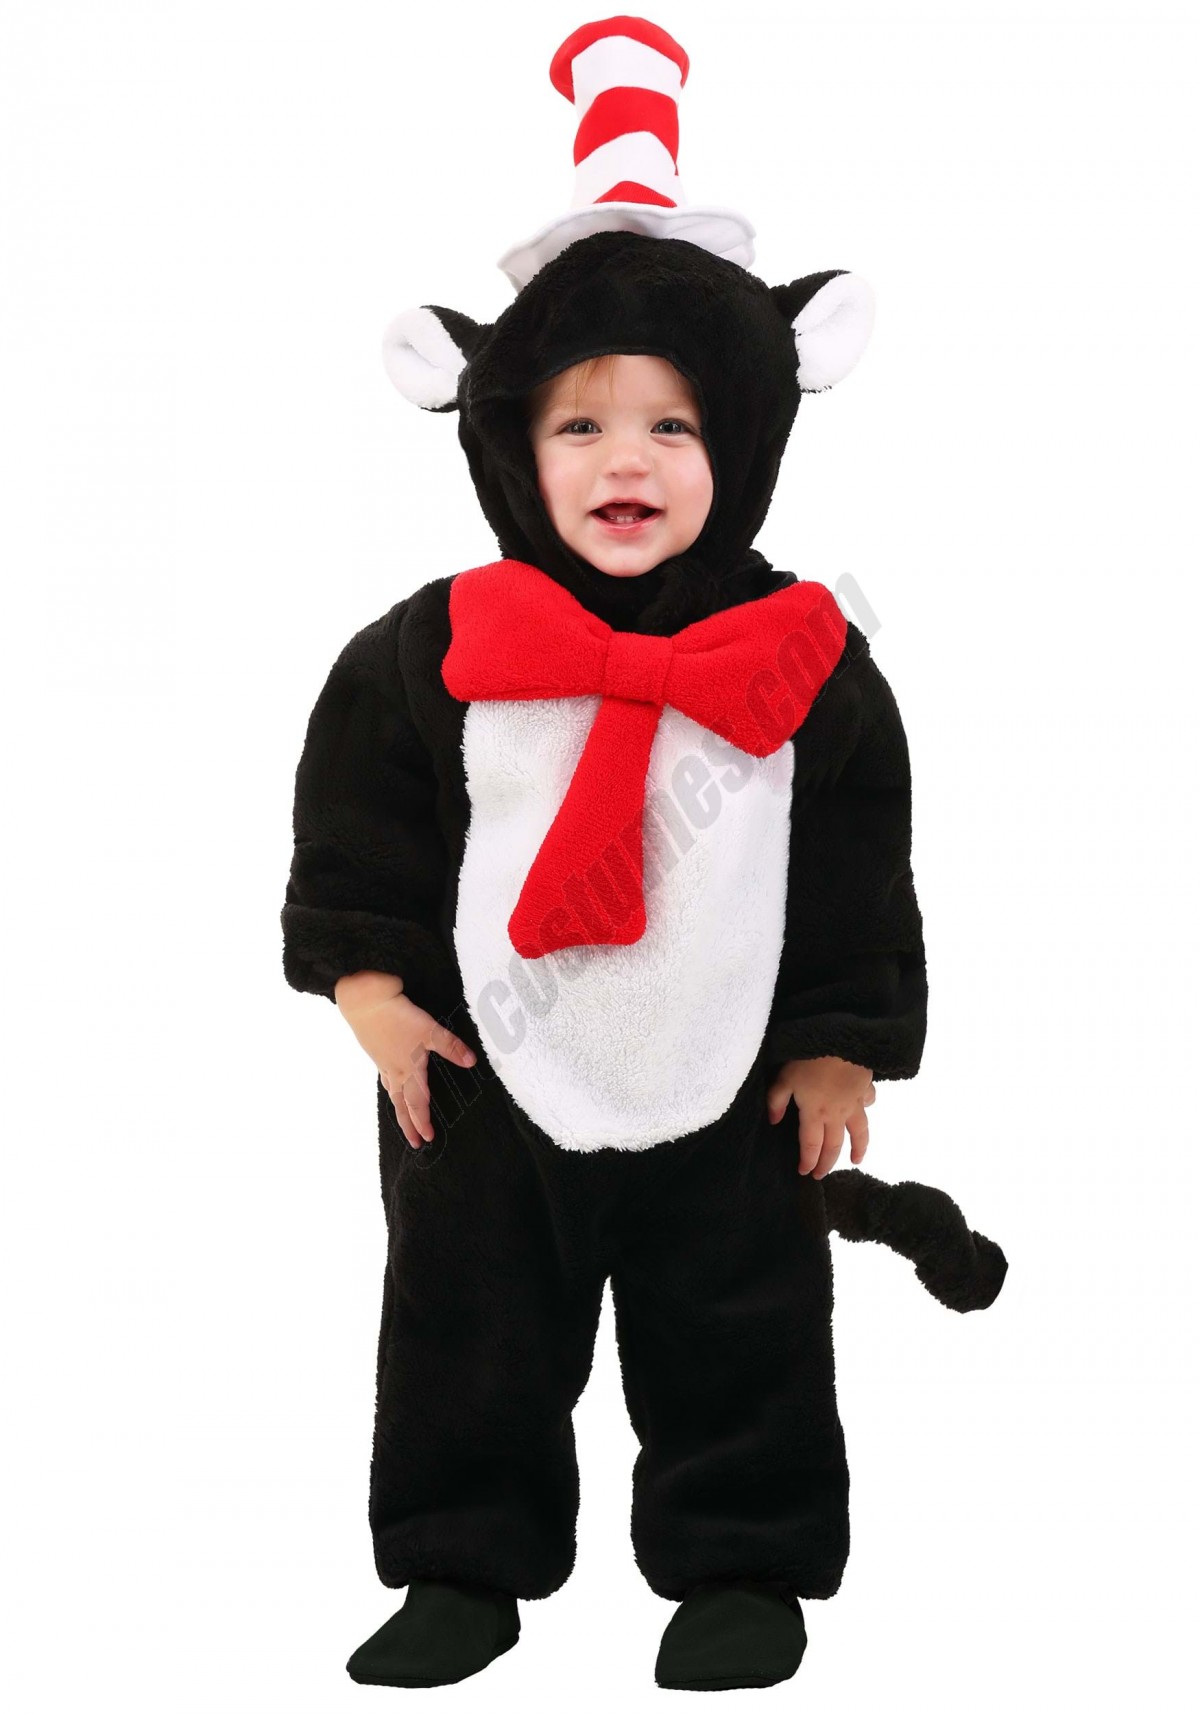 Dr. Seuss: The Cat in the Hat Deluxe Infant Costume Promotions - -0